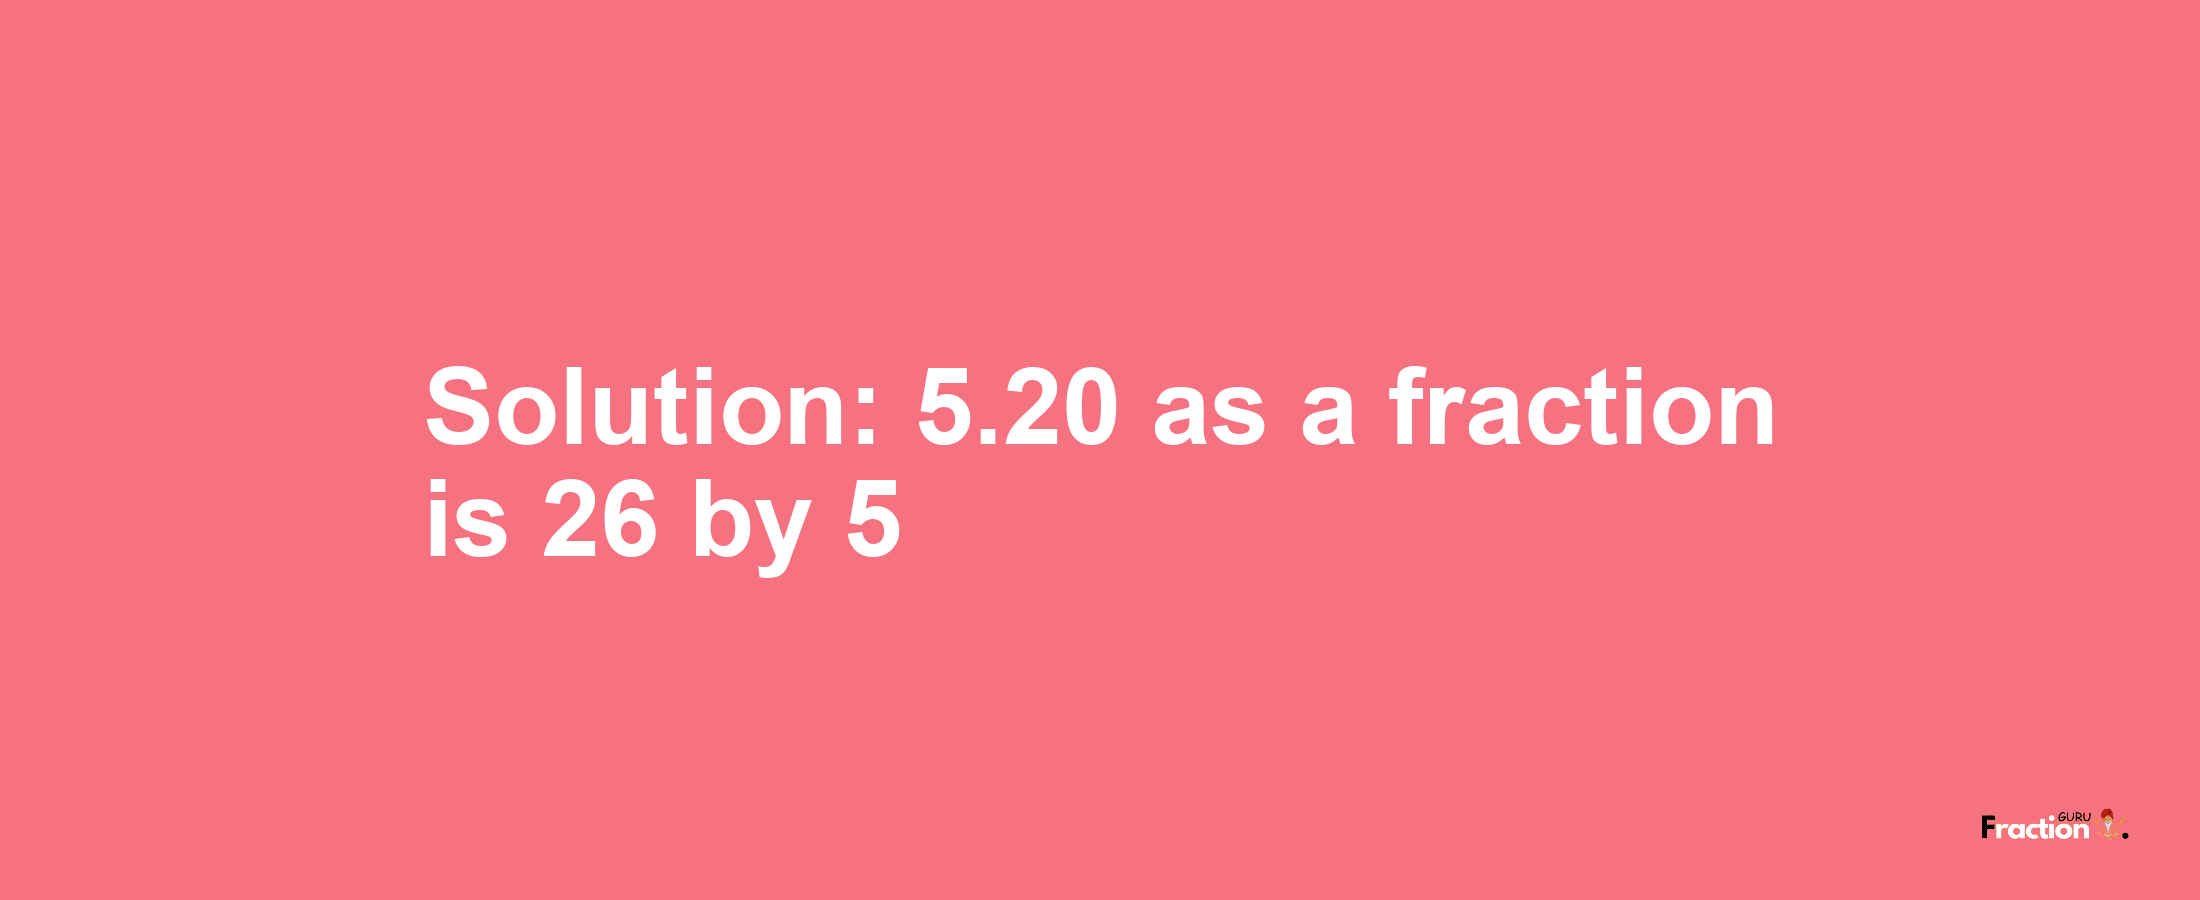 Solution:5.20 as a fraction is 26/5